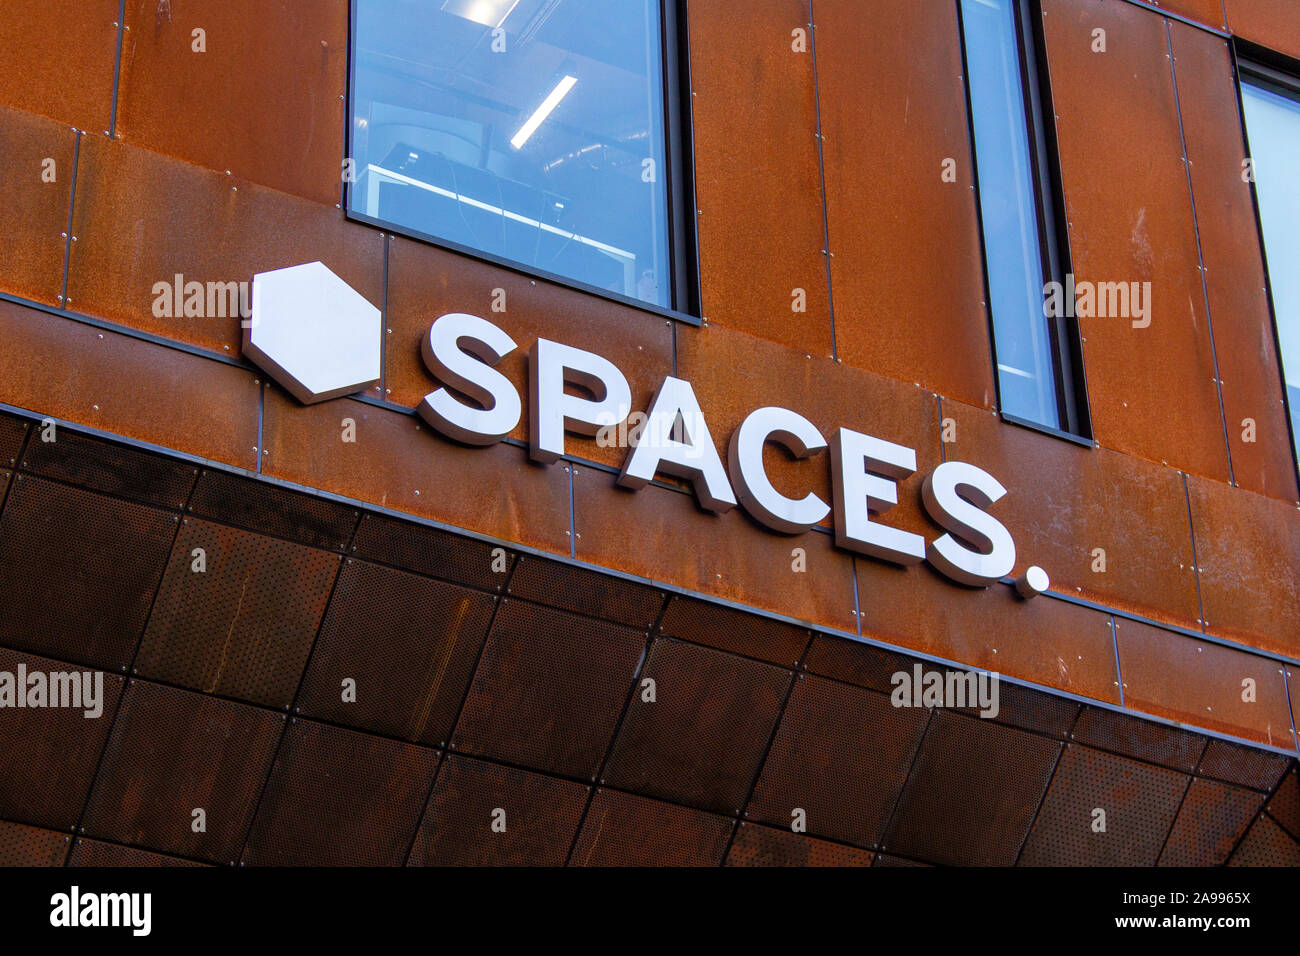 Spaces sign on the build. Co-working business where people can rent space to work at Stock Photo